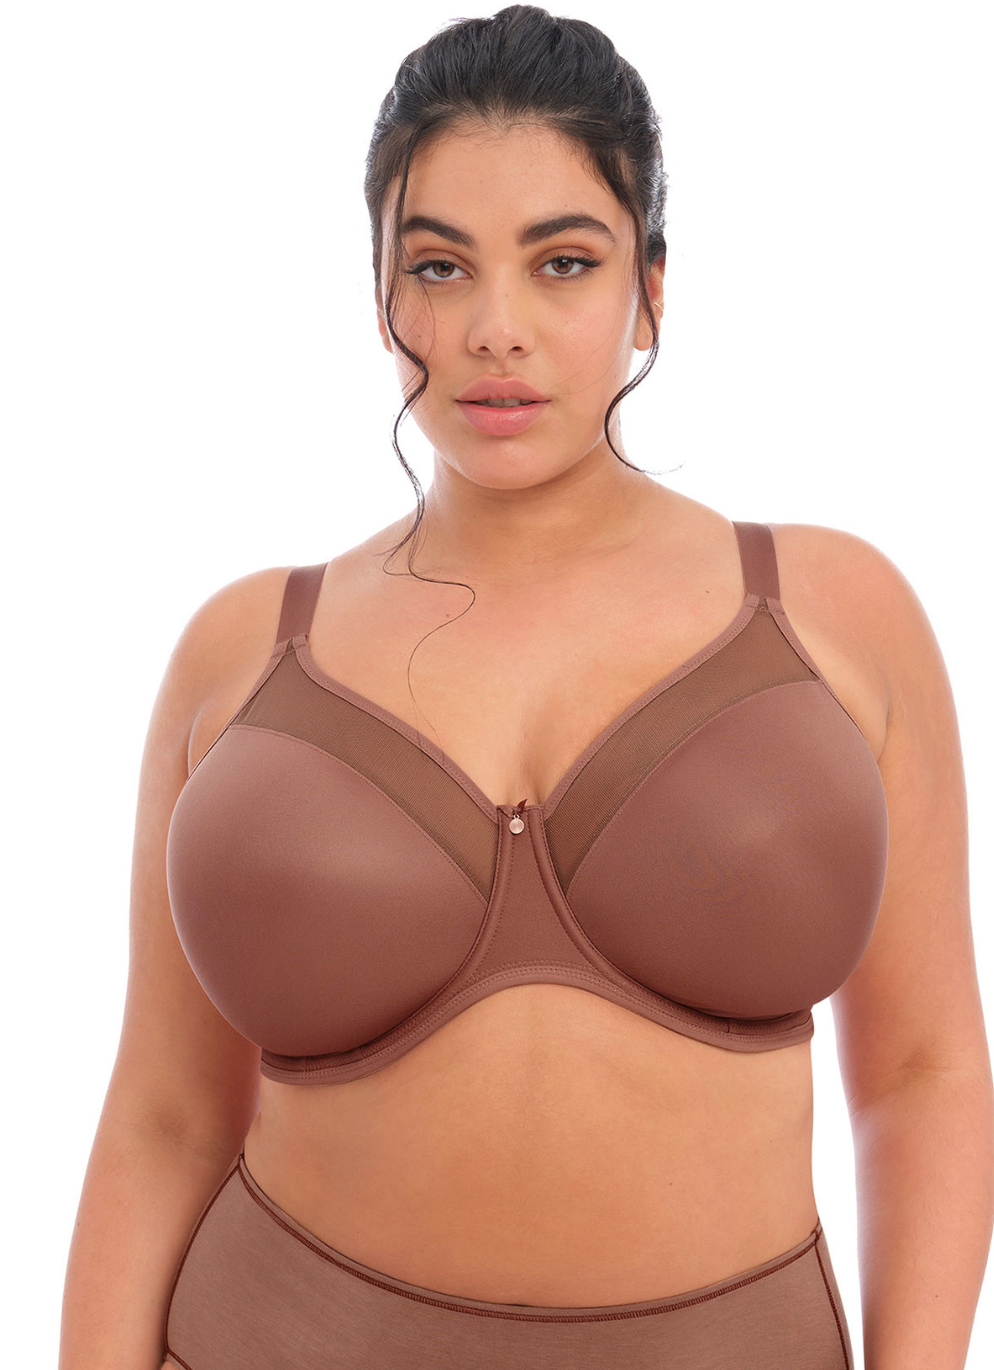 Cotton Bras 38J, Bras for Large Breasts